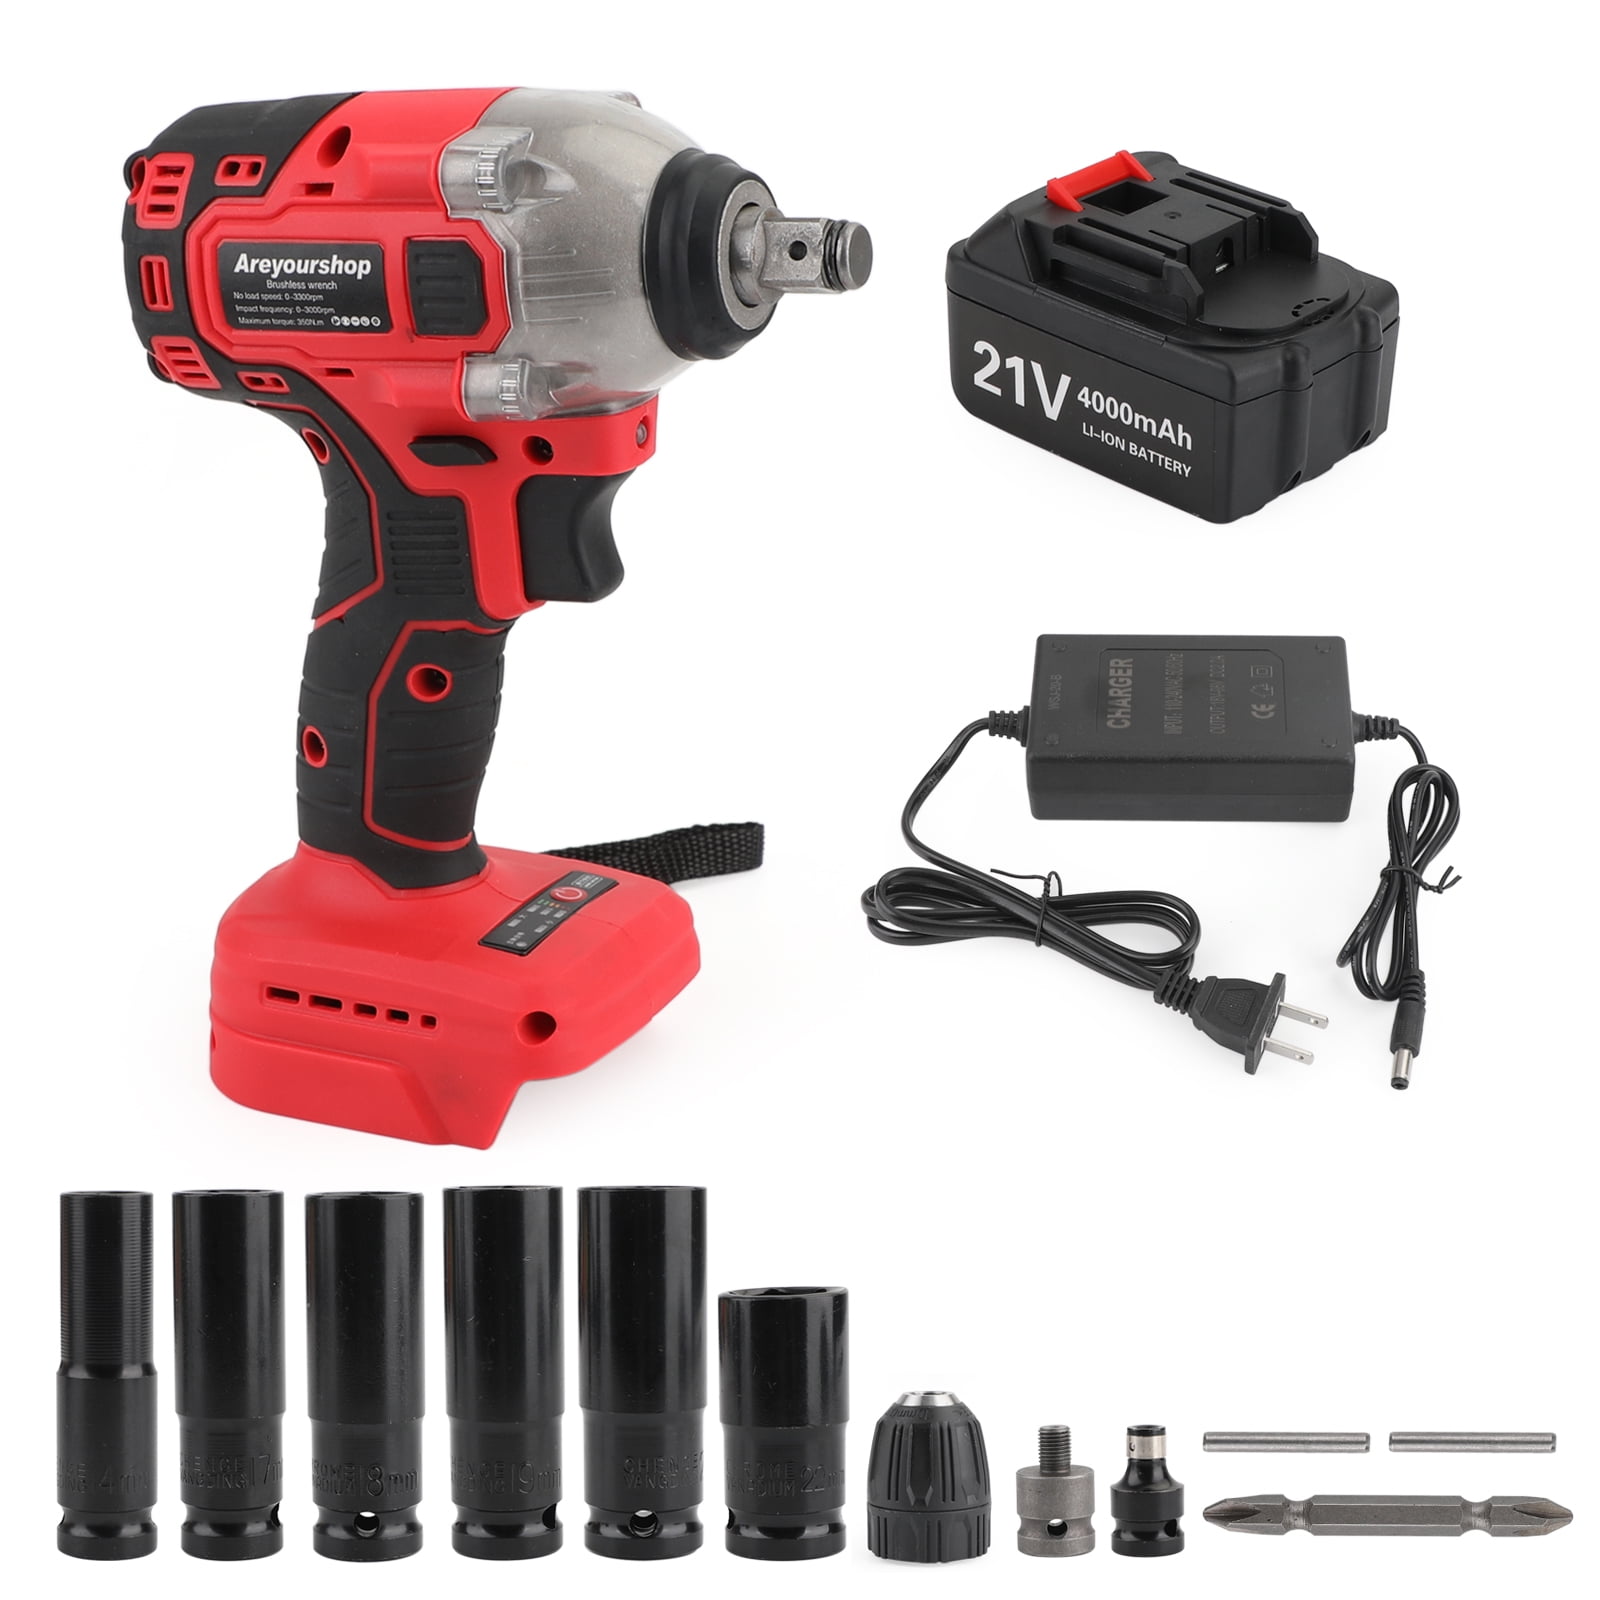 1/2" 20V Brushless Impact Wrench Torque Rattle Gun Electric Battery Portable 